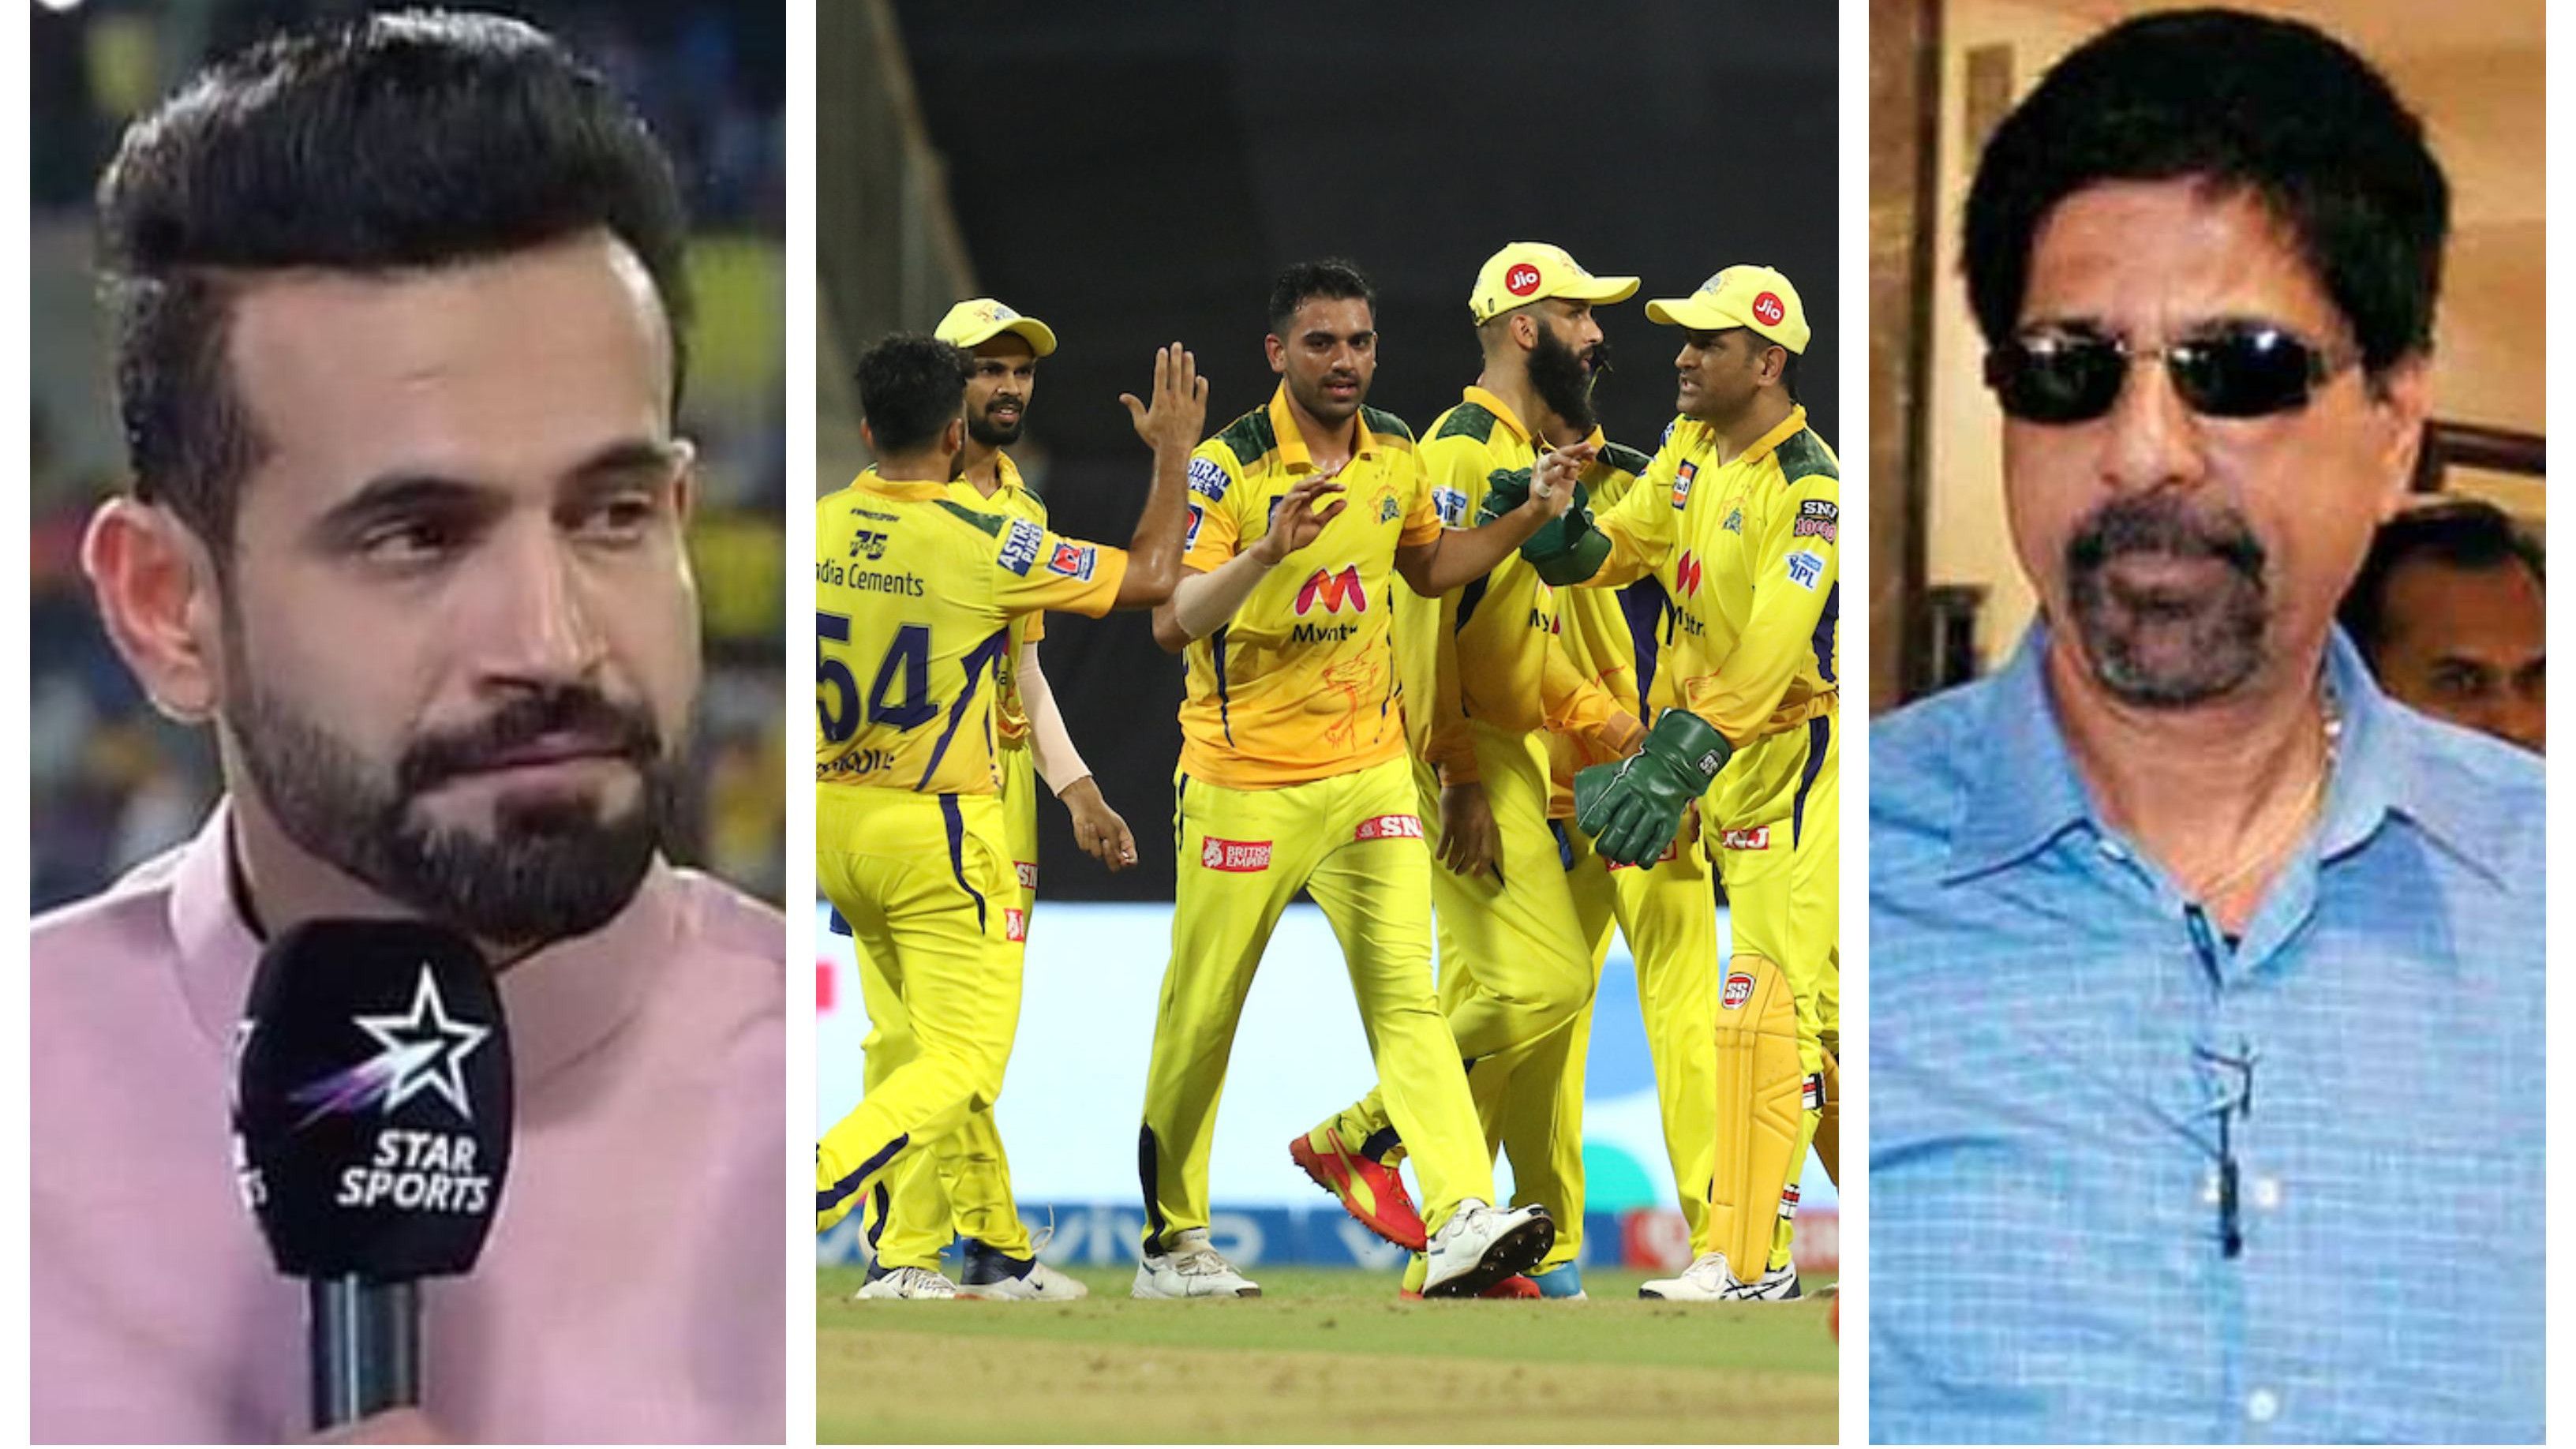 IPL 2021: Cricket fraternity reacts as Deepak Chahar overpowers Russell, Cummins’ heroics to seal CSK’s win over KKR